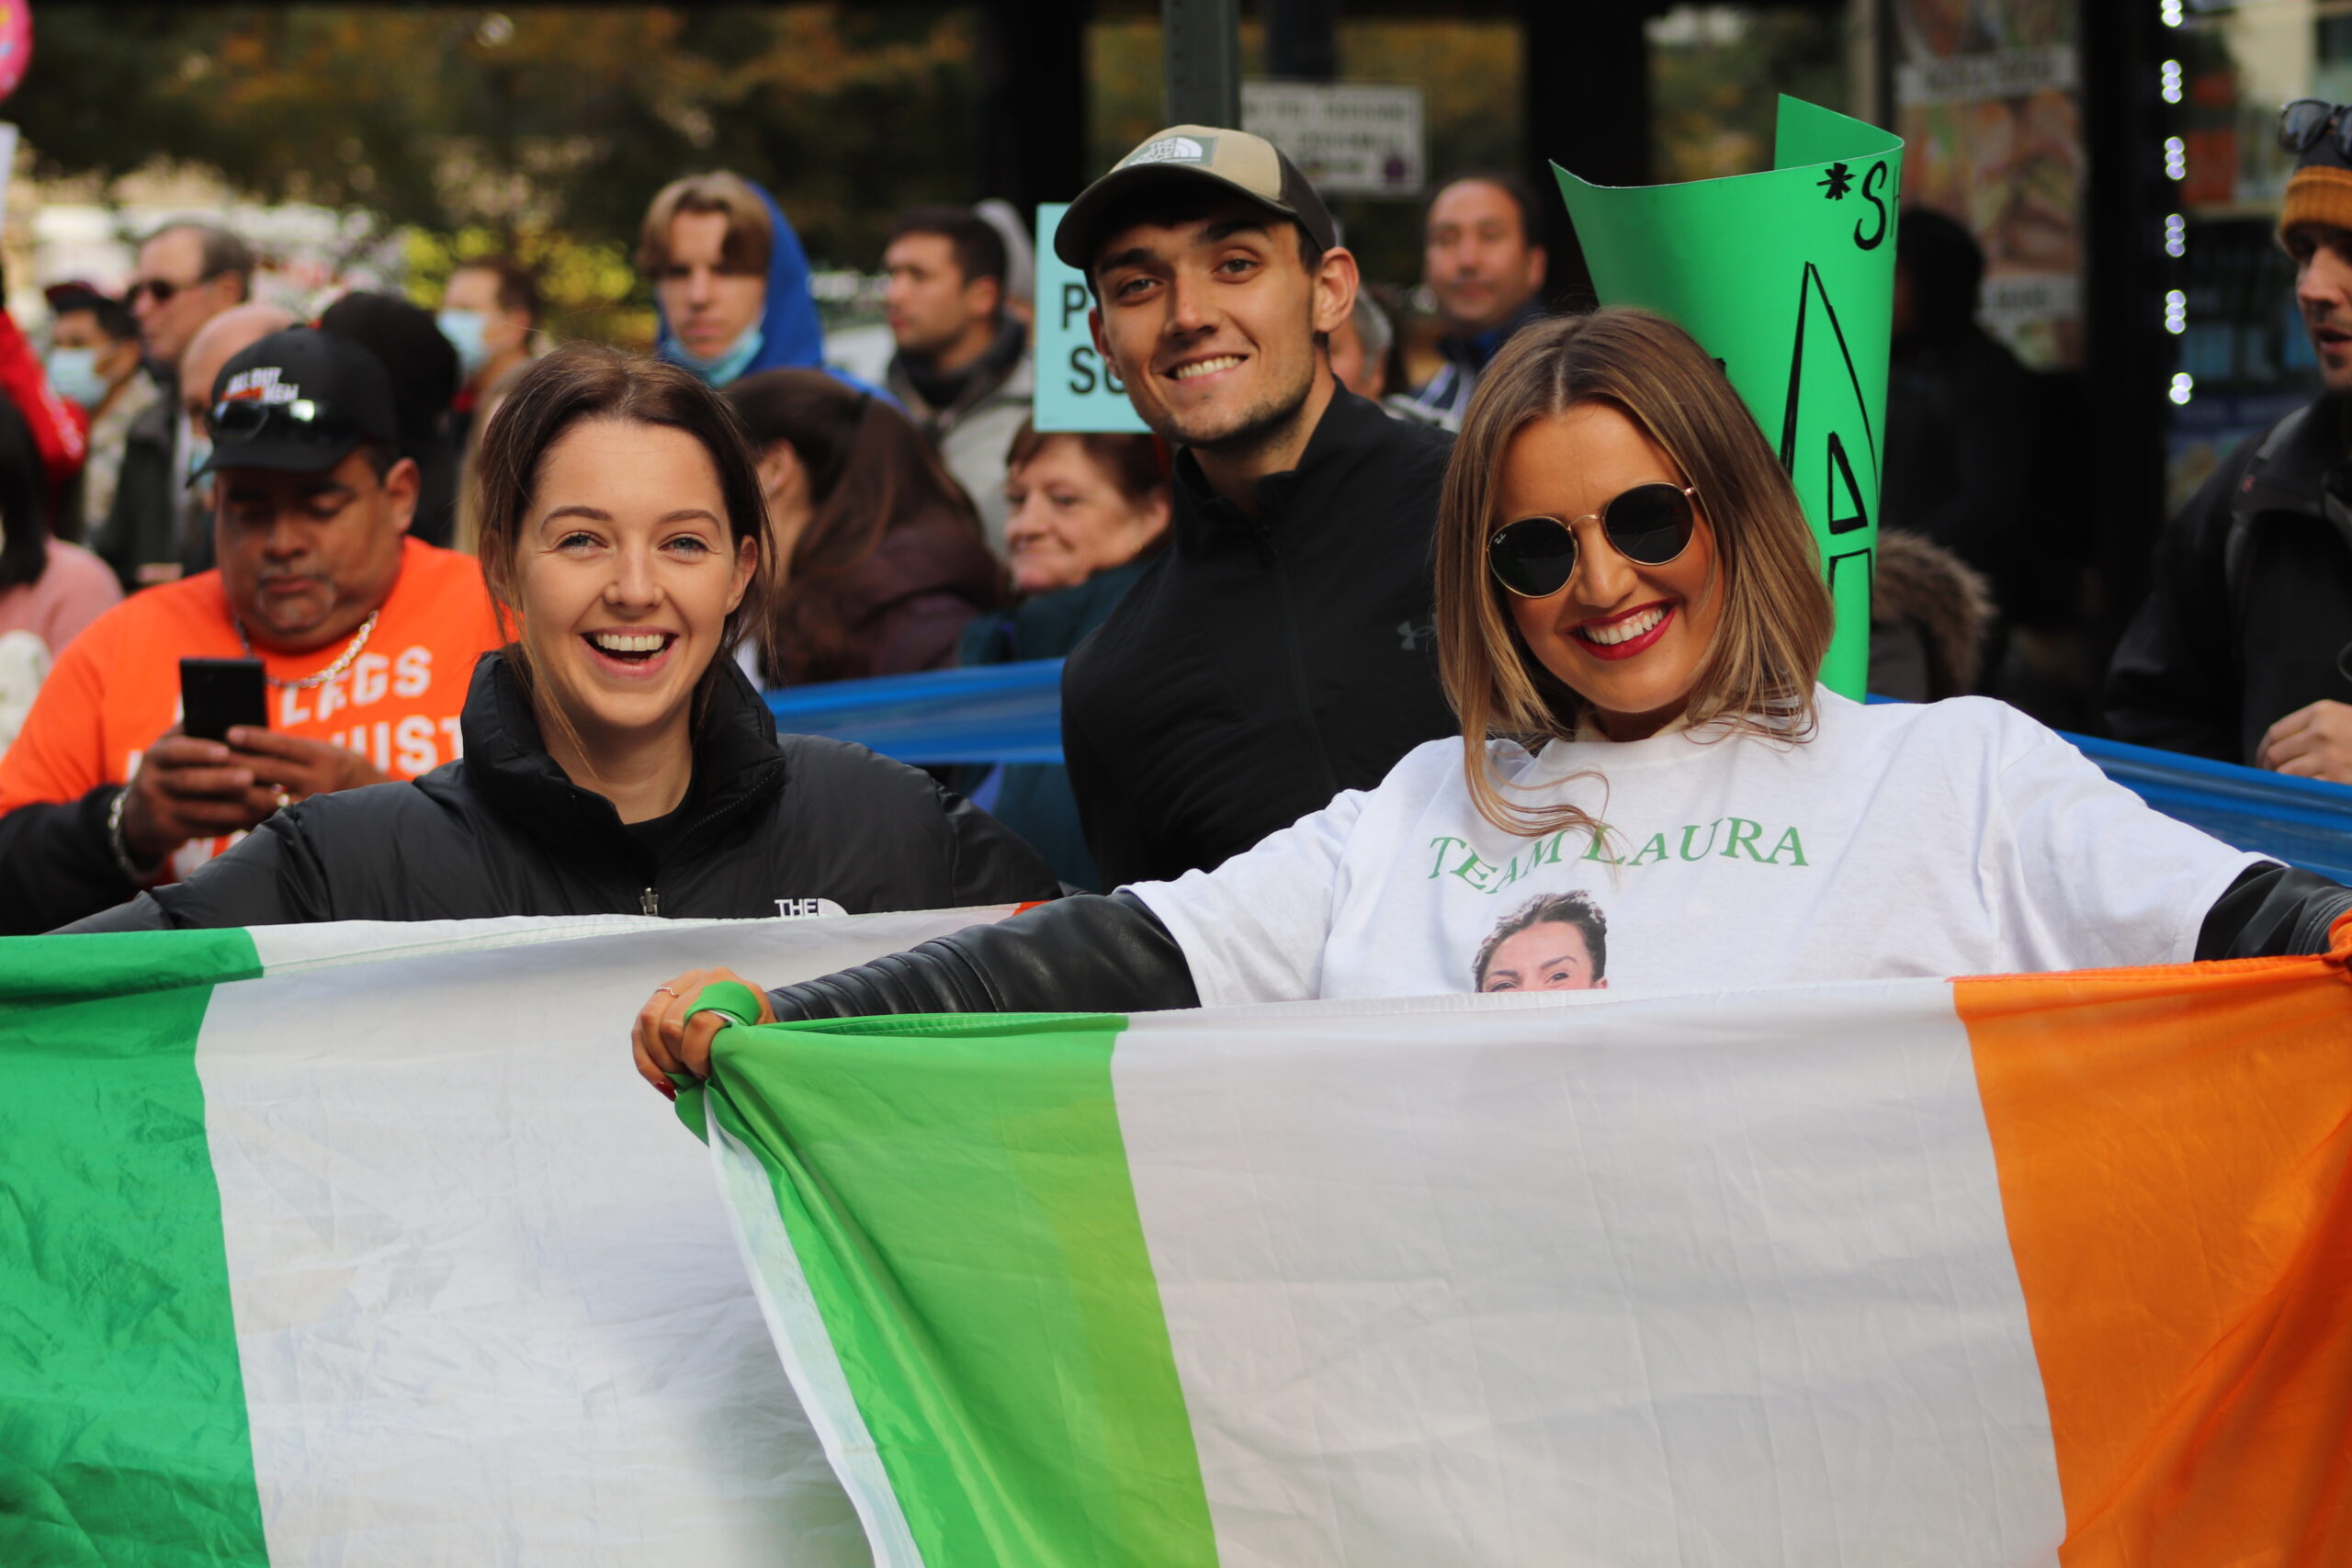 Caron McCormack (L), Peter Fox (C) Niamh Reilly (R) supporting the Irish runners taking part in the 2021 New York City Marathon in Queens (Photo by Michael Dorgan, The Long Hall Podcast)